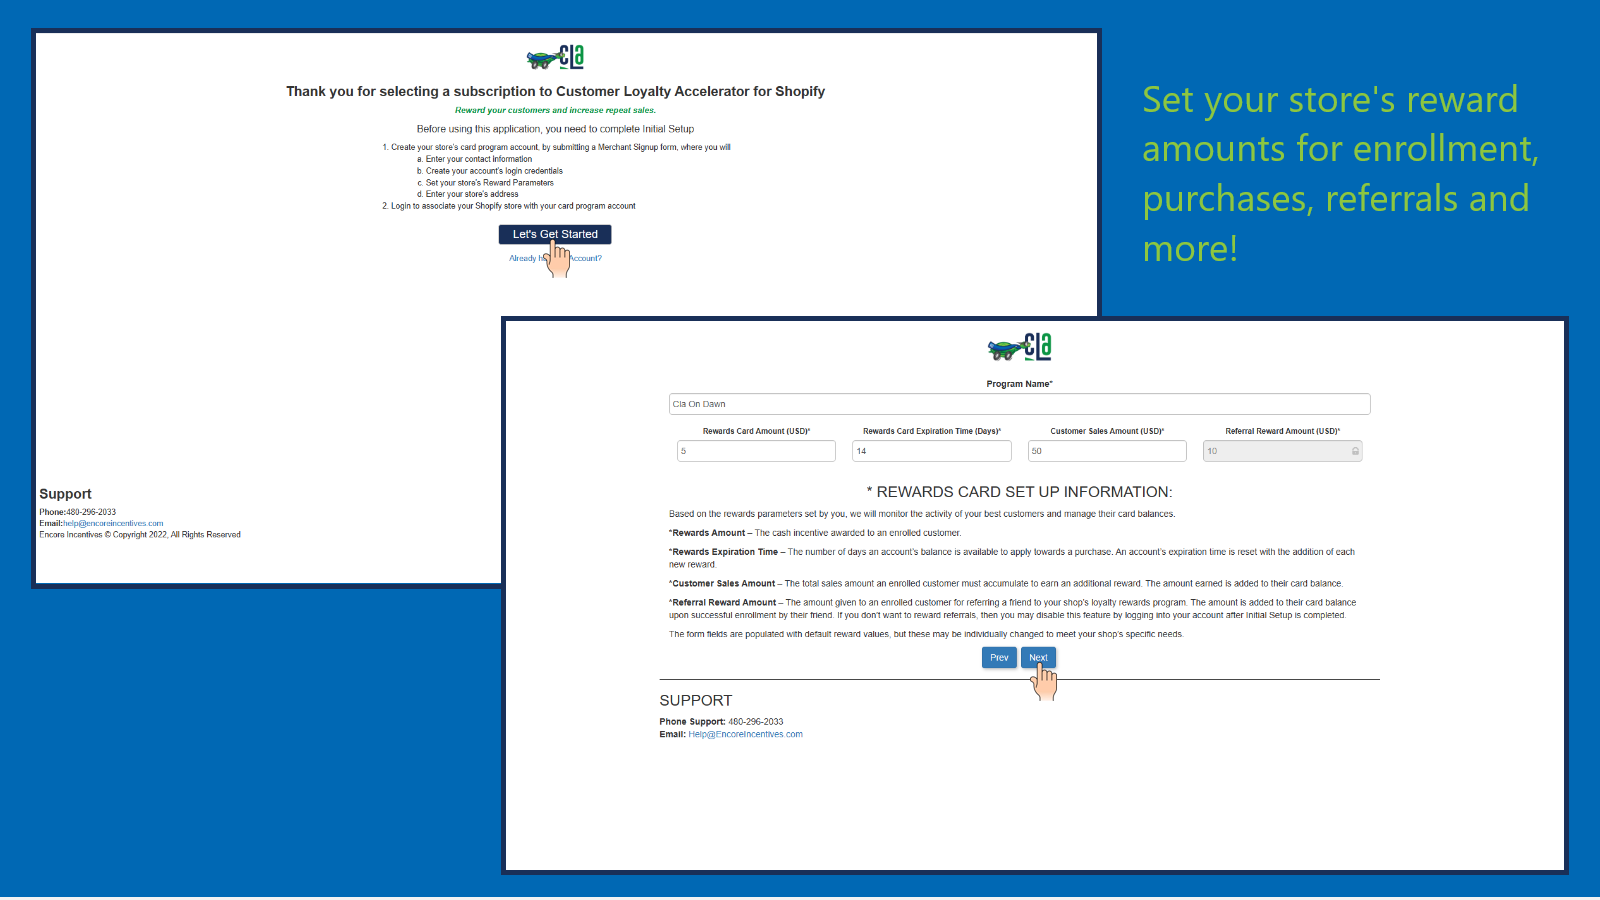 Complete initial setup to set the reward values for your store.